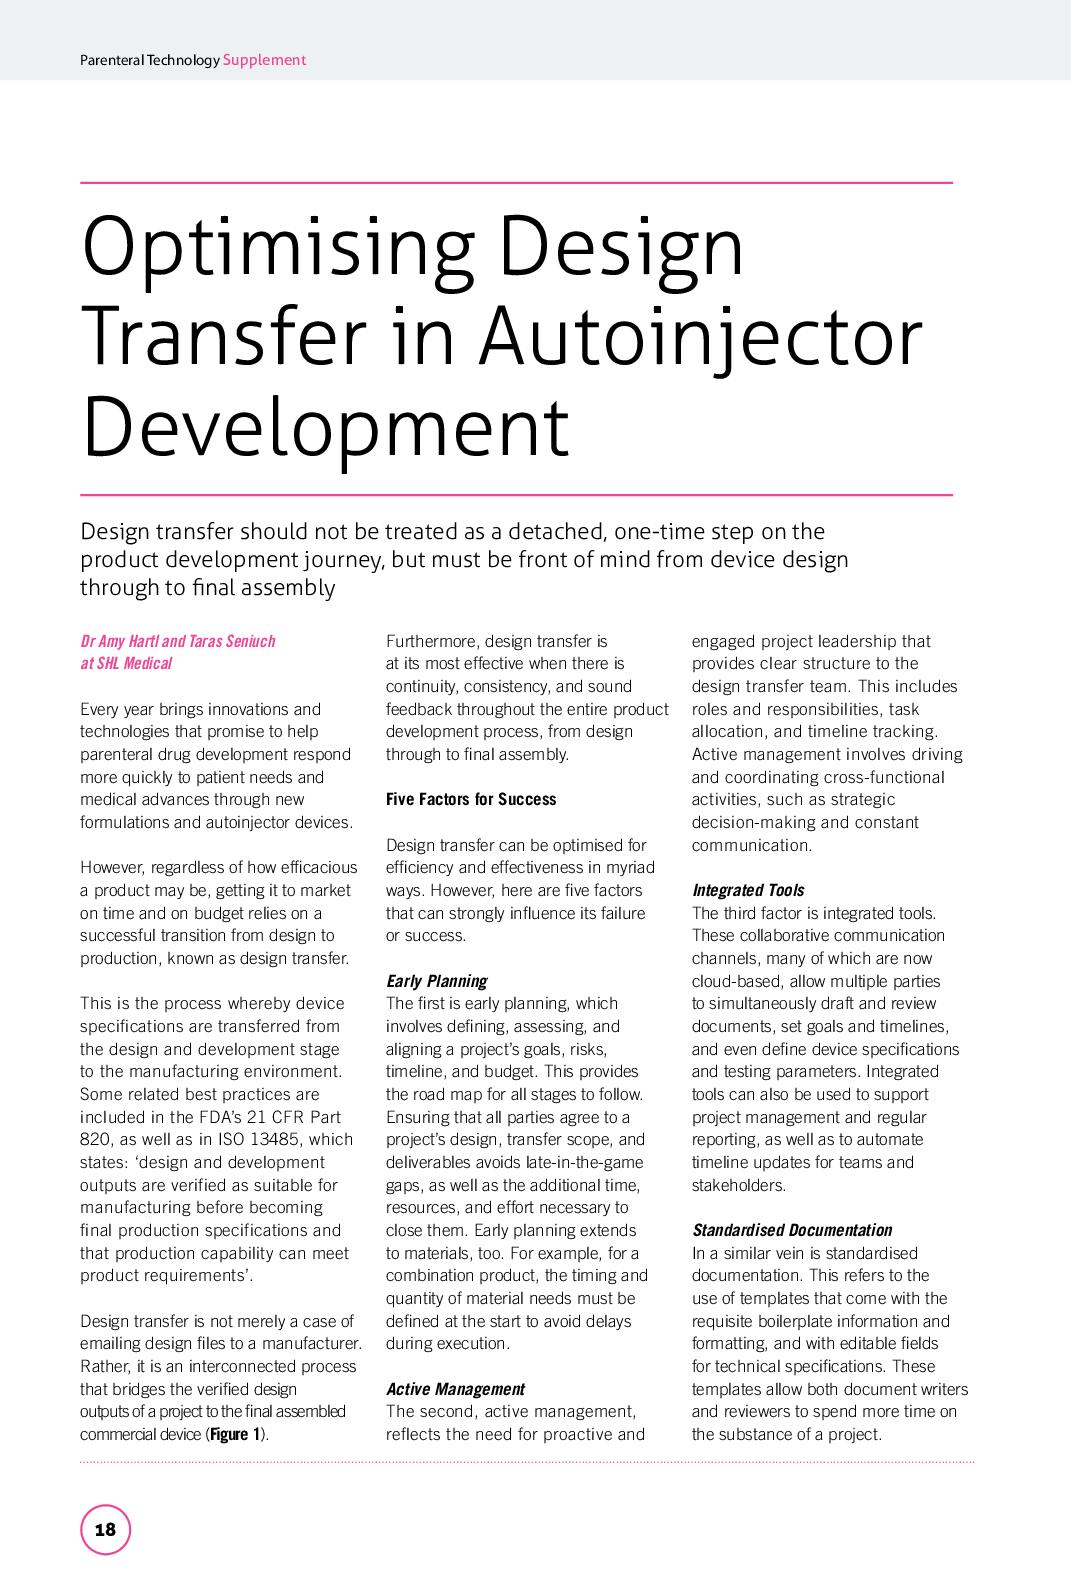 Article featuring SHL's Amy Hartl and Taras Seniuch titled "Optimising Design Transfer in Autoinjector Development"